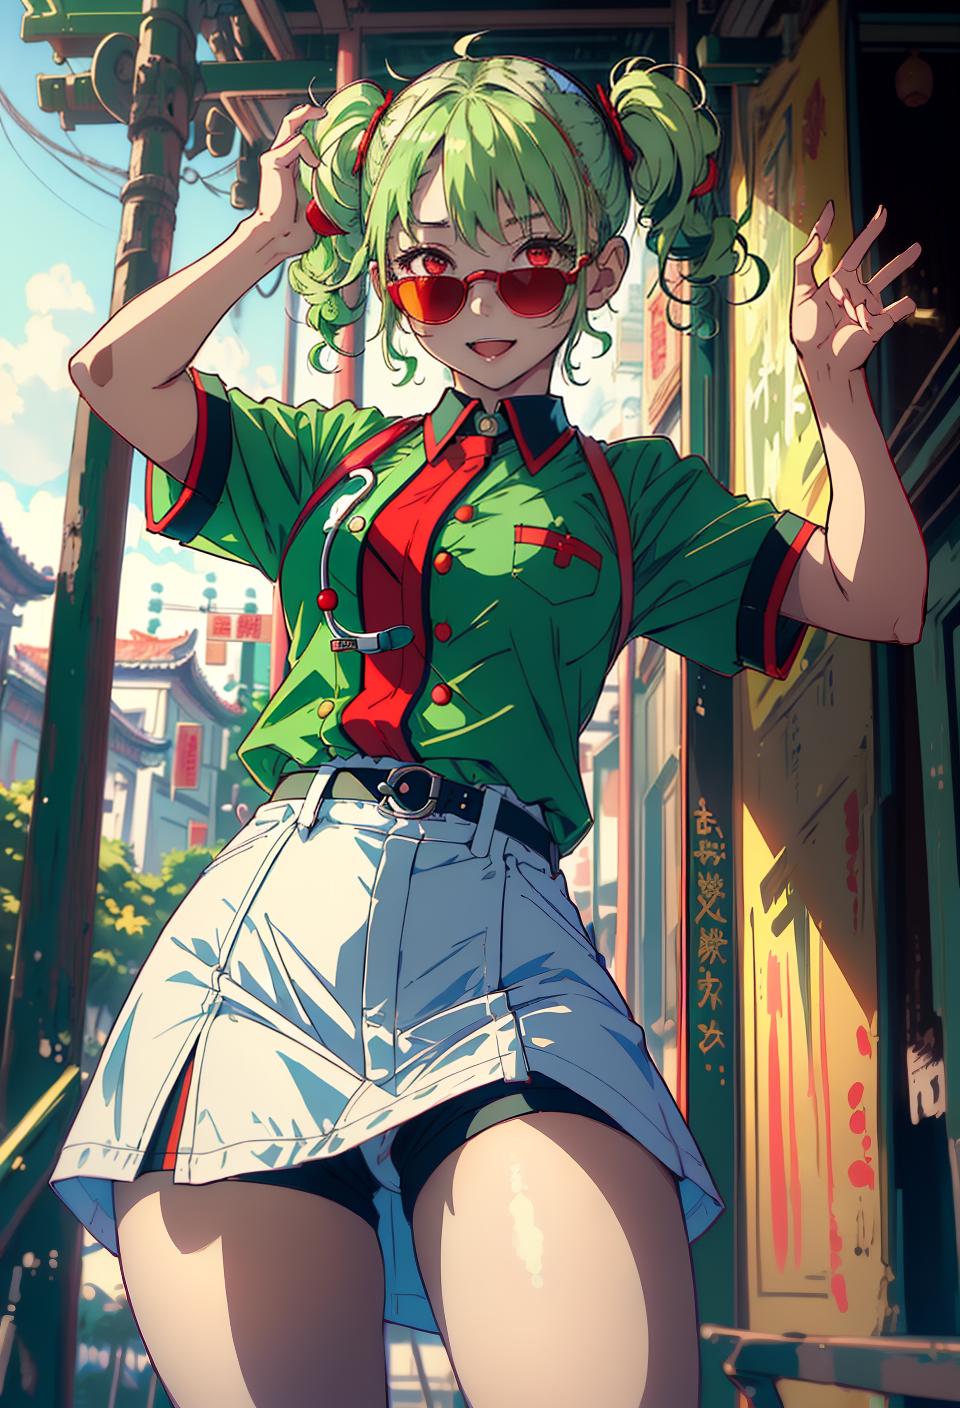  ((trending, highres, masterpiece, cinematic shot)), 1girl, young, female nurse uniform, temple scene, very short curly light green hair, twintails hairstyle,  red eyes, energetic personality, happy expression, sunglasses, fair skin, morbid, limber